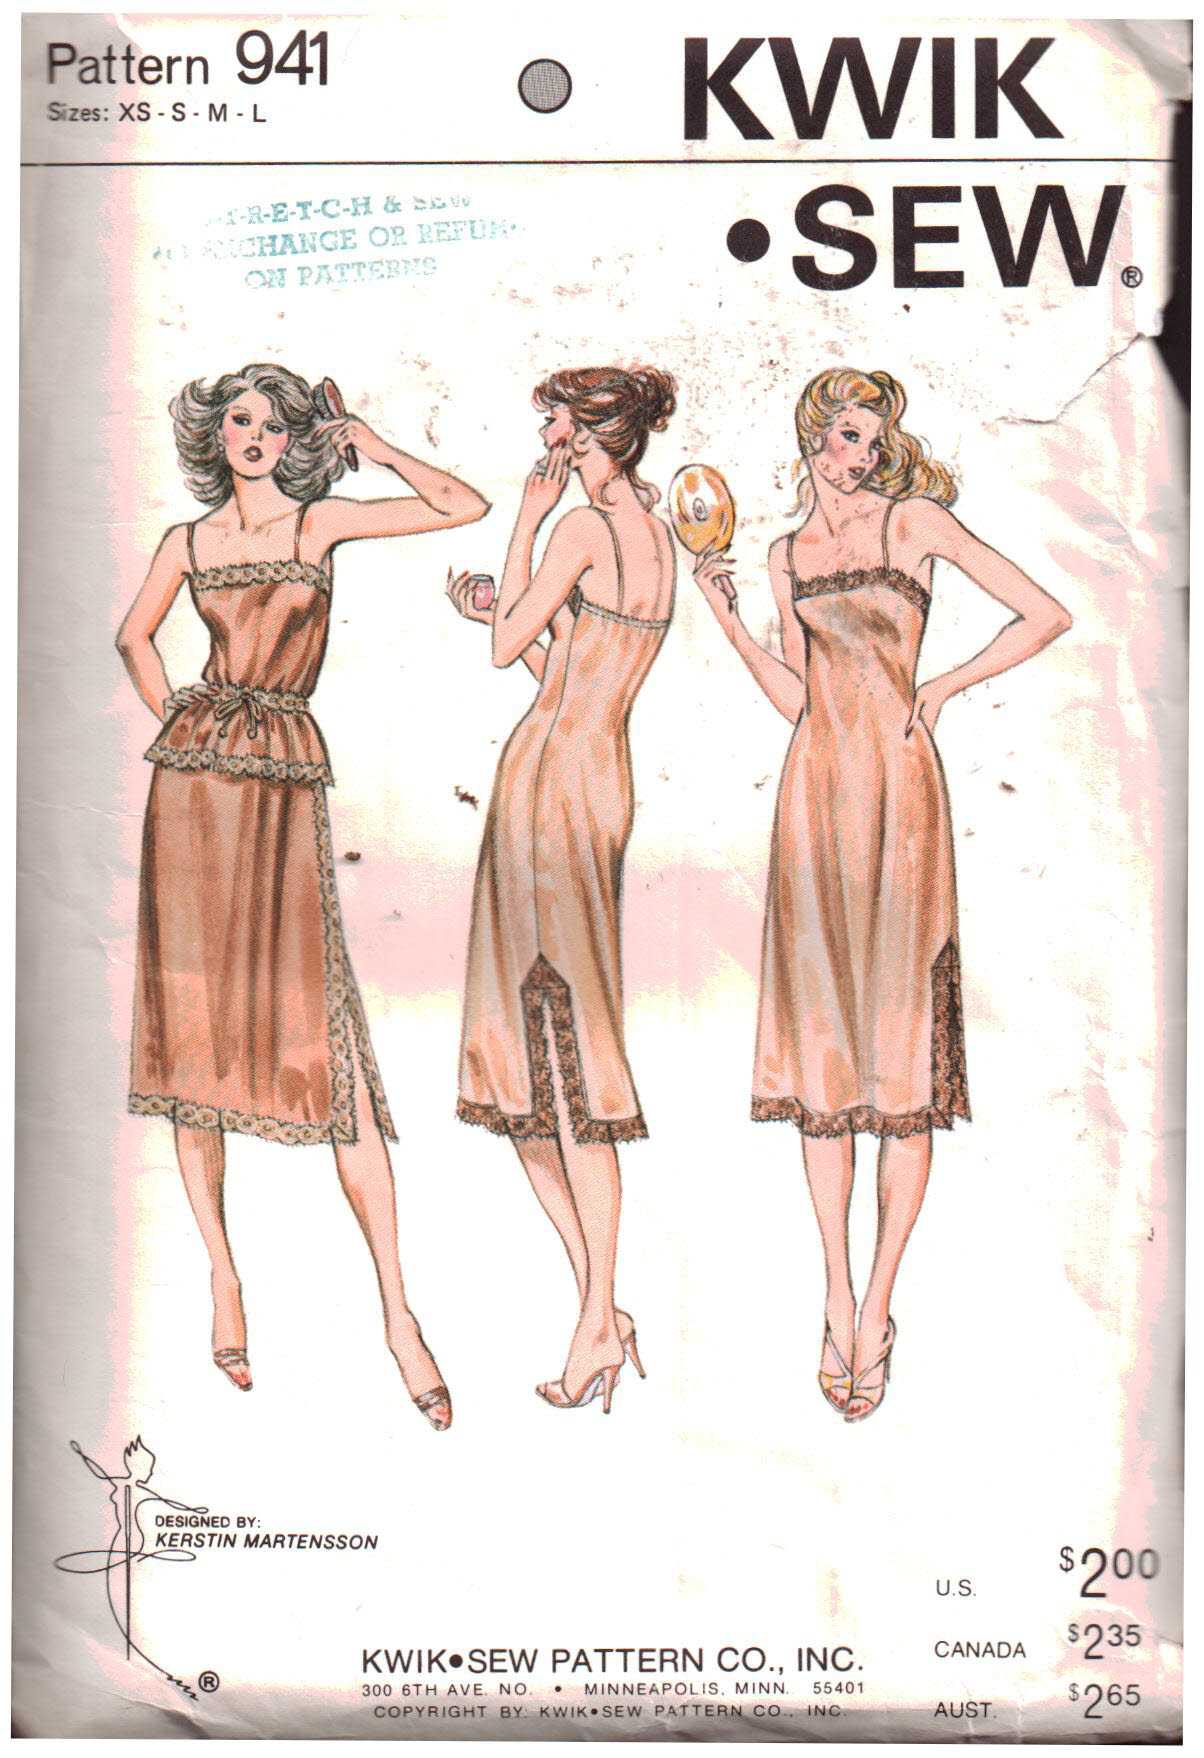  Simplicity 1930's Fashion Women's Vintage Bra and Panties  Sewing Patterns, Sizes 12-20 : Arts, Crafts & Sewing